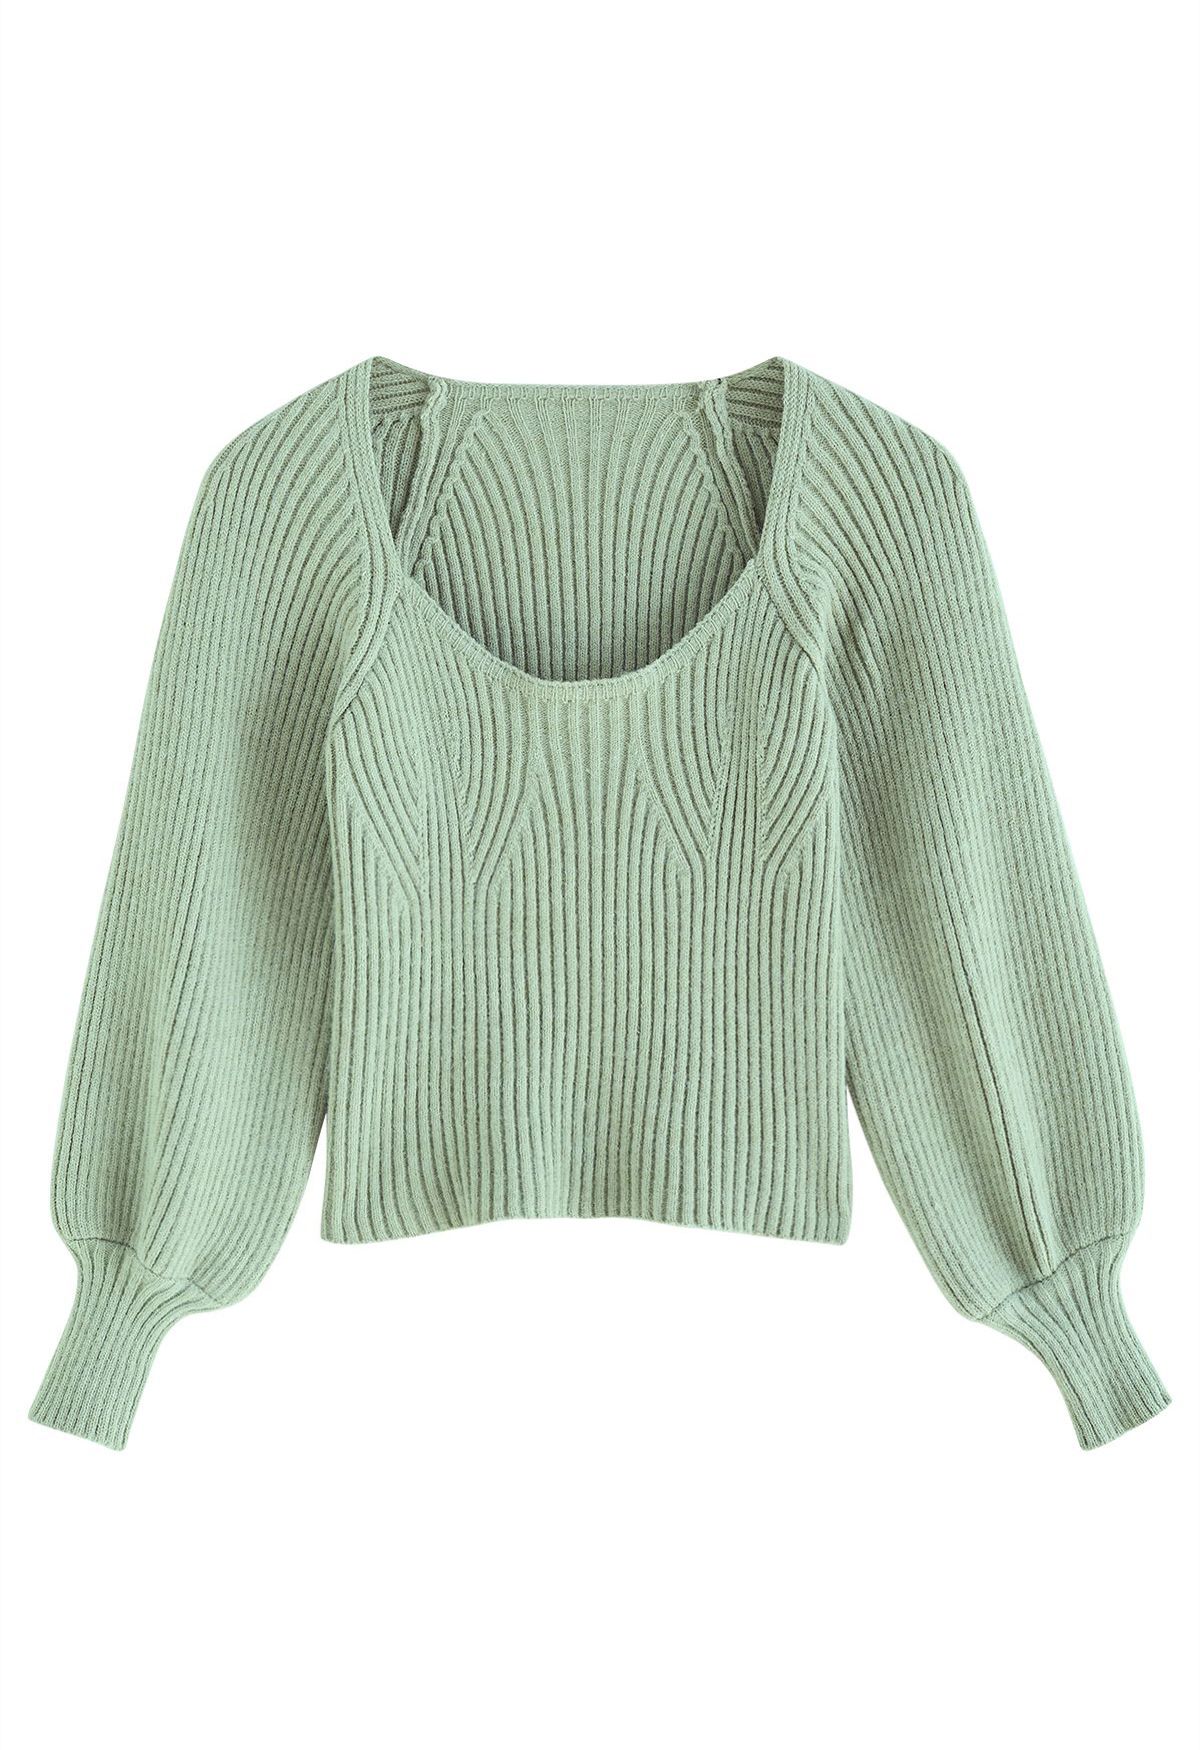 Wide Round Neck Rib Knit Top in Mint - Retro, Indie and Unique Fashion